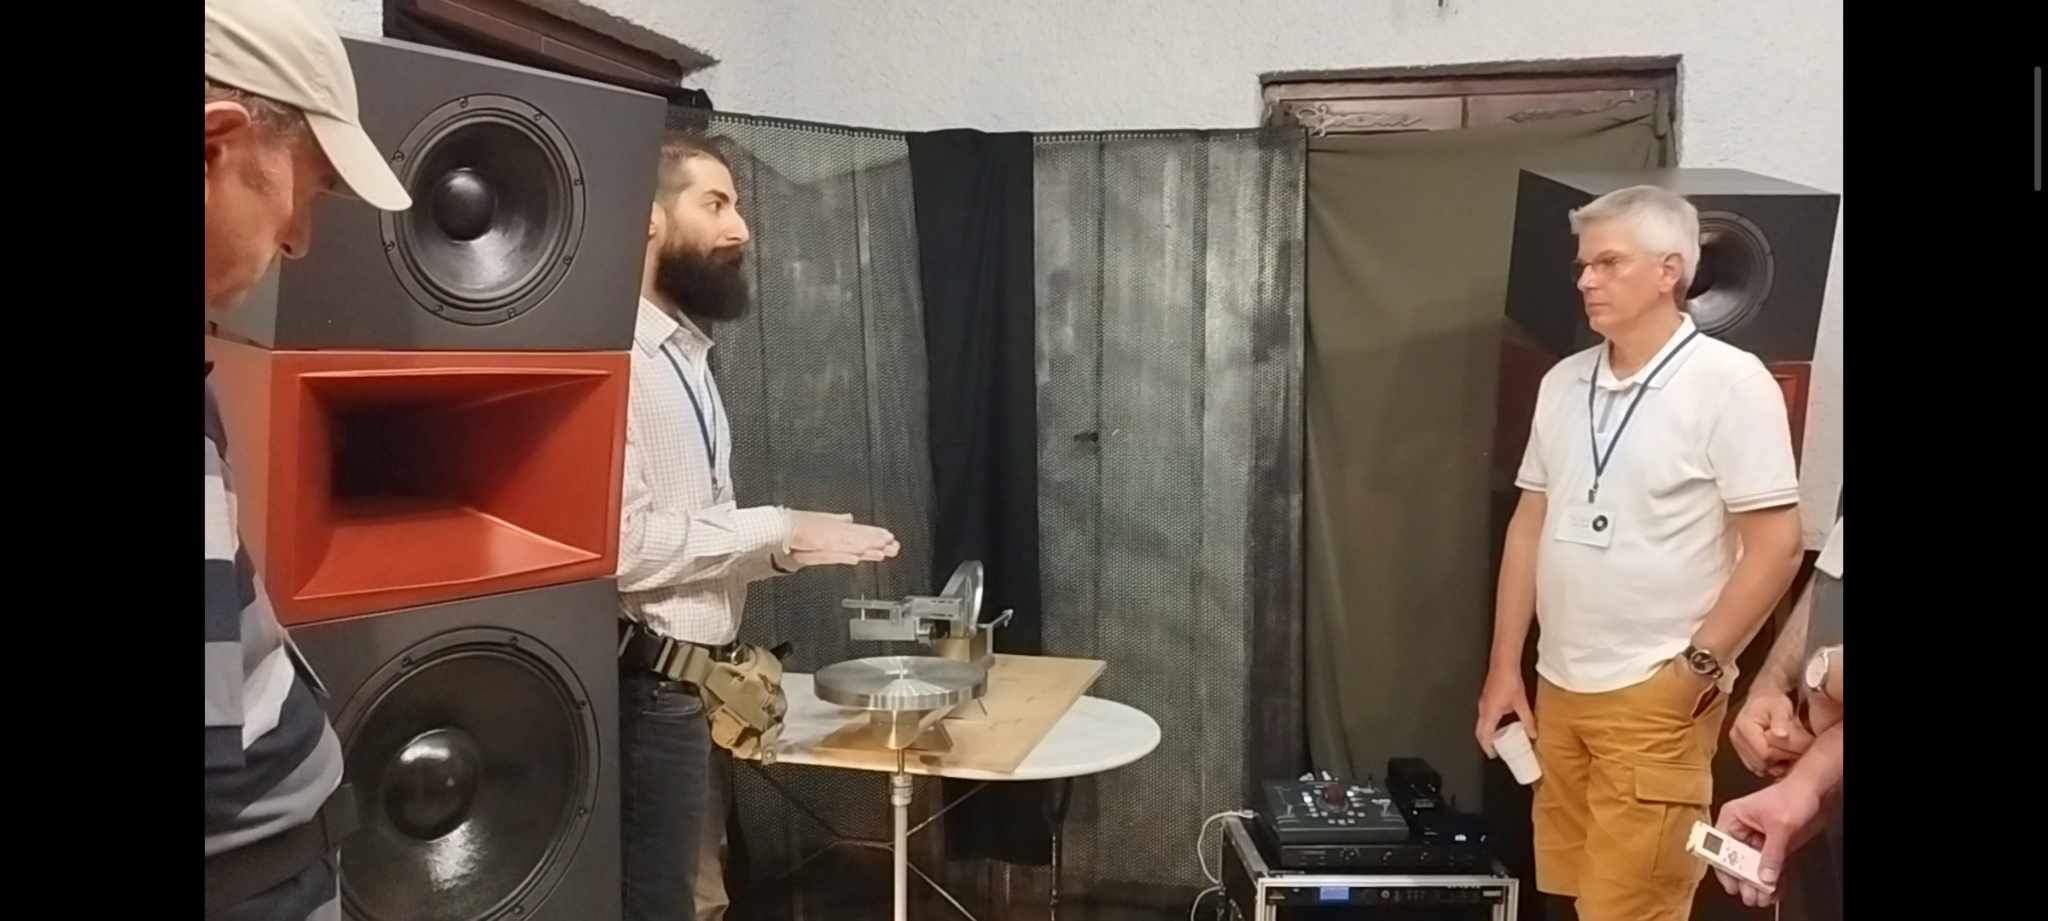 J. I. Agnew (Agnew Analog) demonstrating the Agnew Analog Reference Instrument Type 612 disk mastering lathe. To his left, on the other side of the Spine Audio monitor loudspeaker is Yannis Ioannidis (Polygram) and to his right is Miles Showell (freelance mastering engineer at Abbey Road Studios).